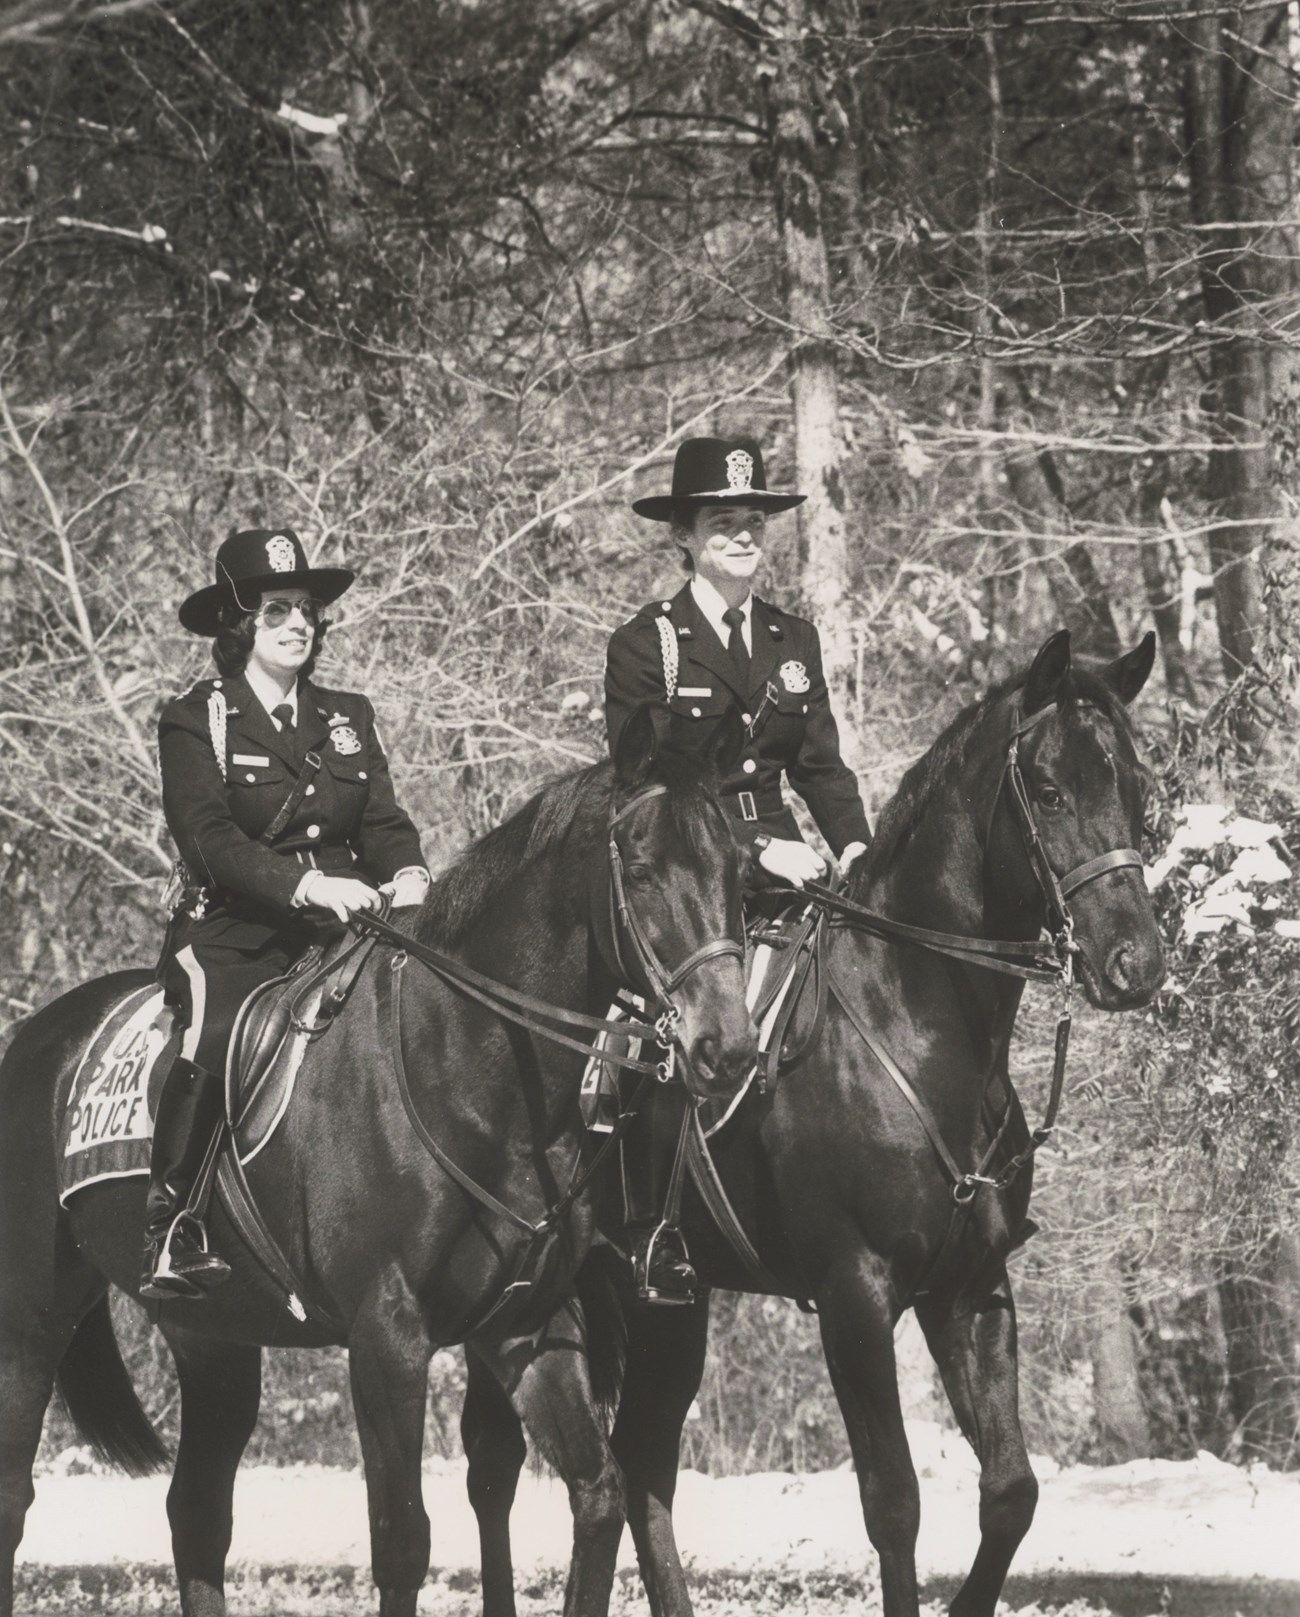 Two women in Park Police uniforms ride horses.